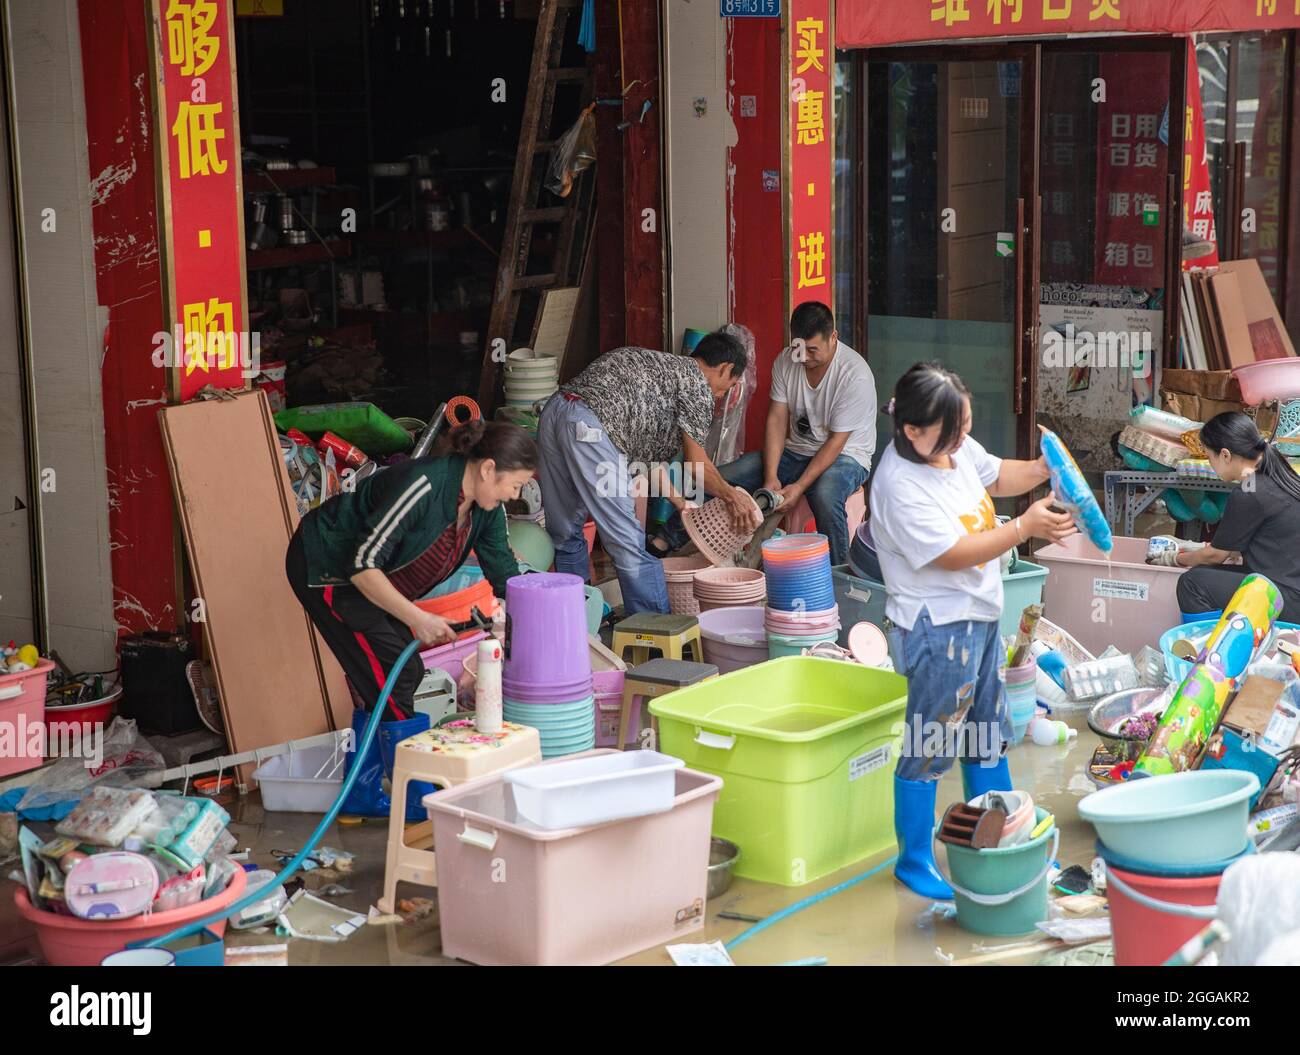 (210830) -- CHONGQING, Aug. 30, 2021 (Xinhua) -- Shop owners clean items after a flood in Wuxi County of Chongqing, southwest China, Aug. 30, 2021. Heavy rain has led to the flooding of four rivers in southwest China's Chongqing Municipality, and more than 2,000 people have been evacuated, according to Chongqing's flood control and drought relief headquarters. In Wuxi County, more than 260 shops were flooded due to constant rain. Local public security and emergency departments have jointly established rescue teams to help shop owners transfer materials and evacuate people who are trapped to Stock Photo